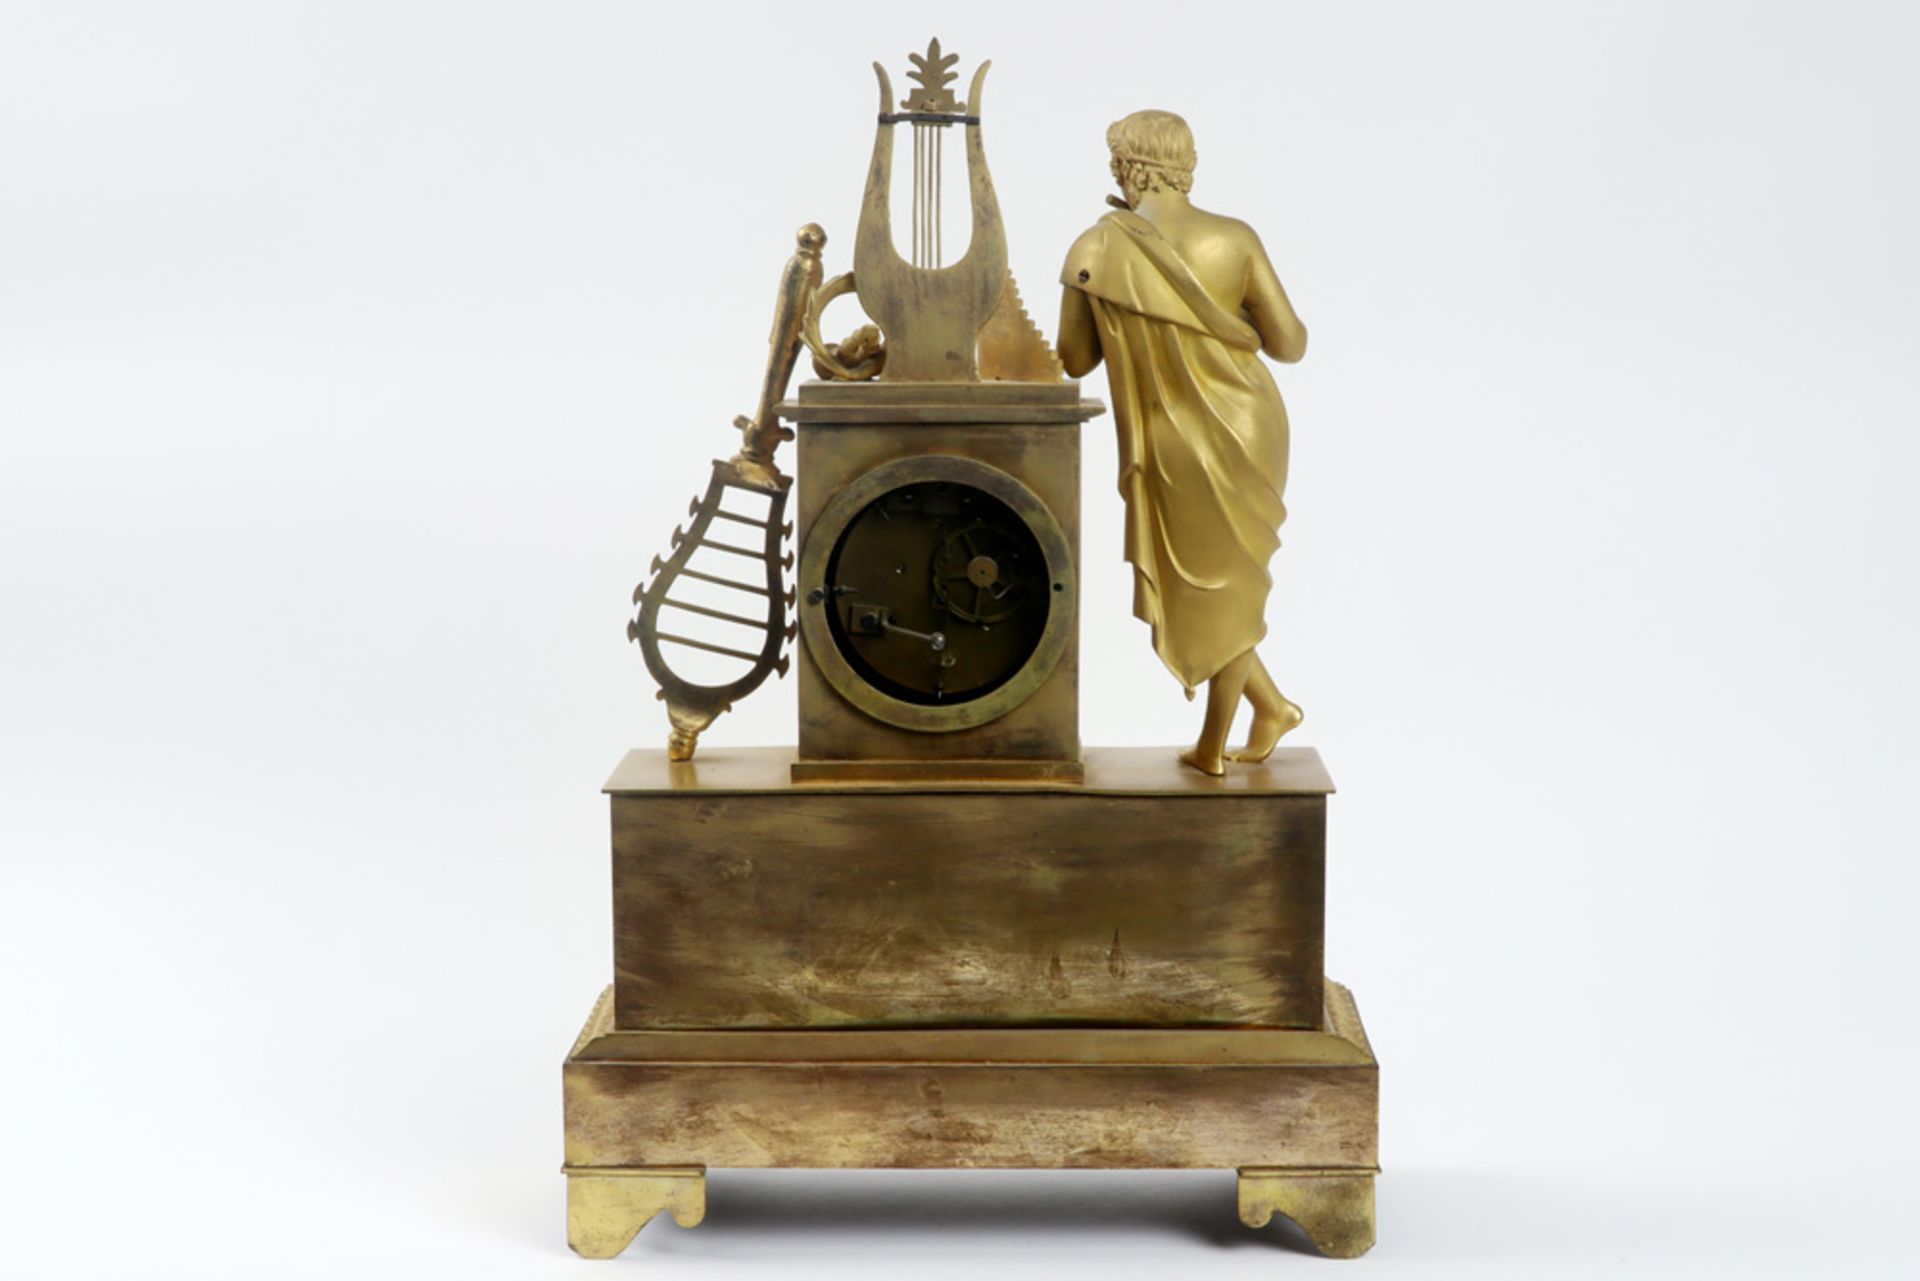 19th Cent. Empire style ormulu clock with its case in gilded bronze and with a "Pons 1823" signed - Bild 2 aus 3